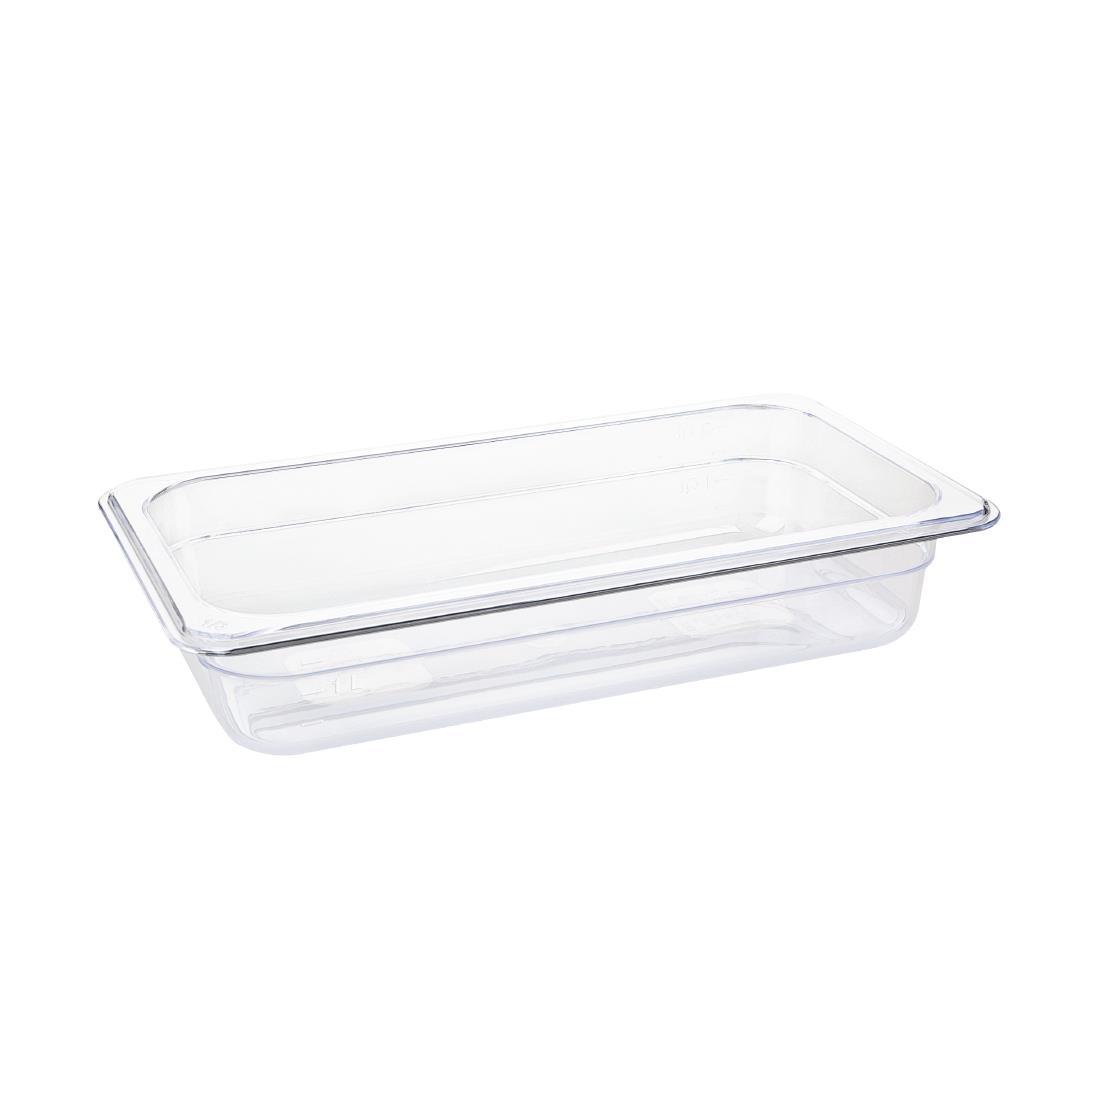 Vogue Polycarbonate 1/3 Gastronorm Container 65mm Clear - U232  - 1